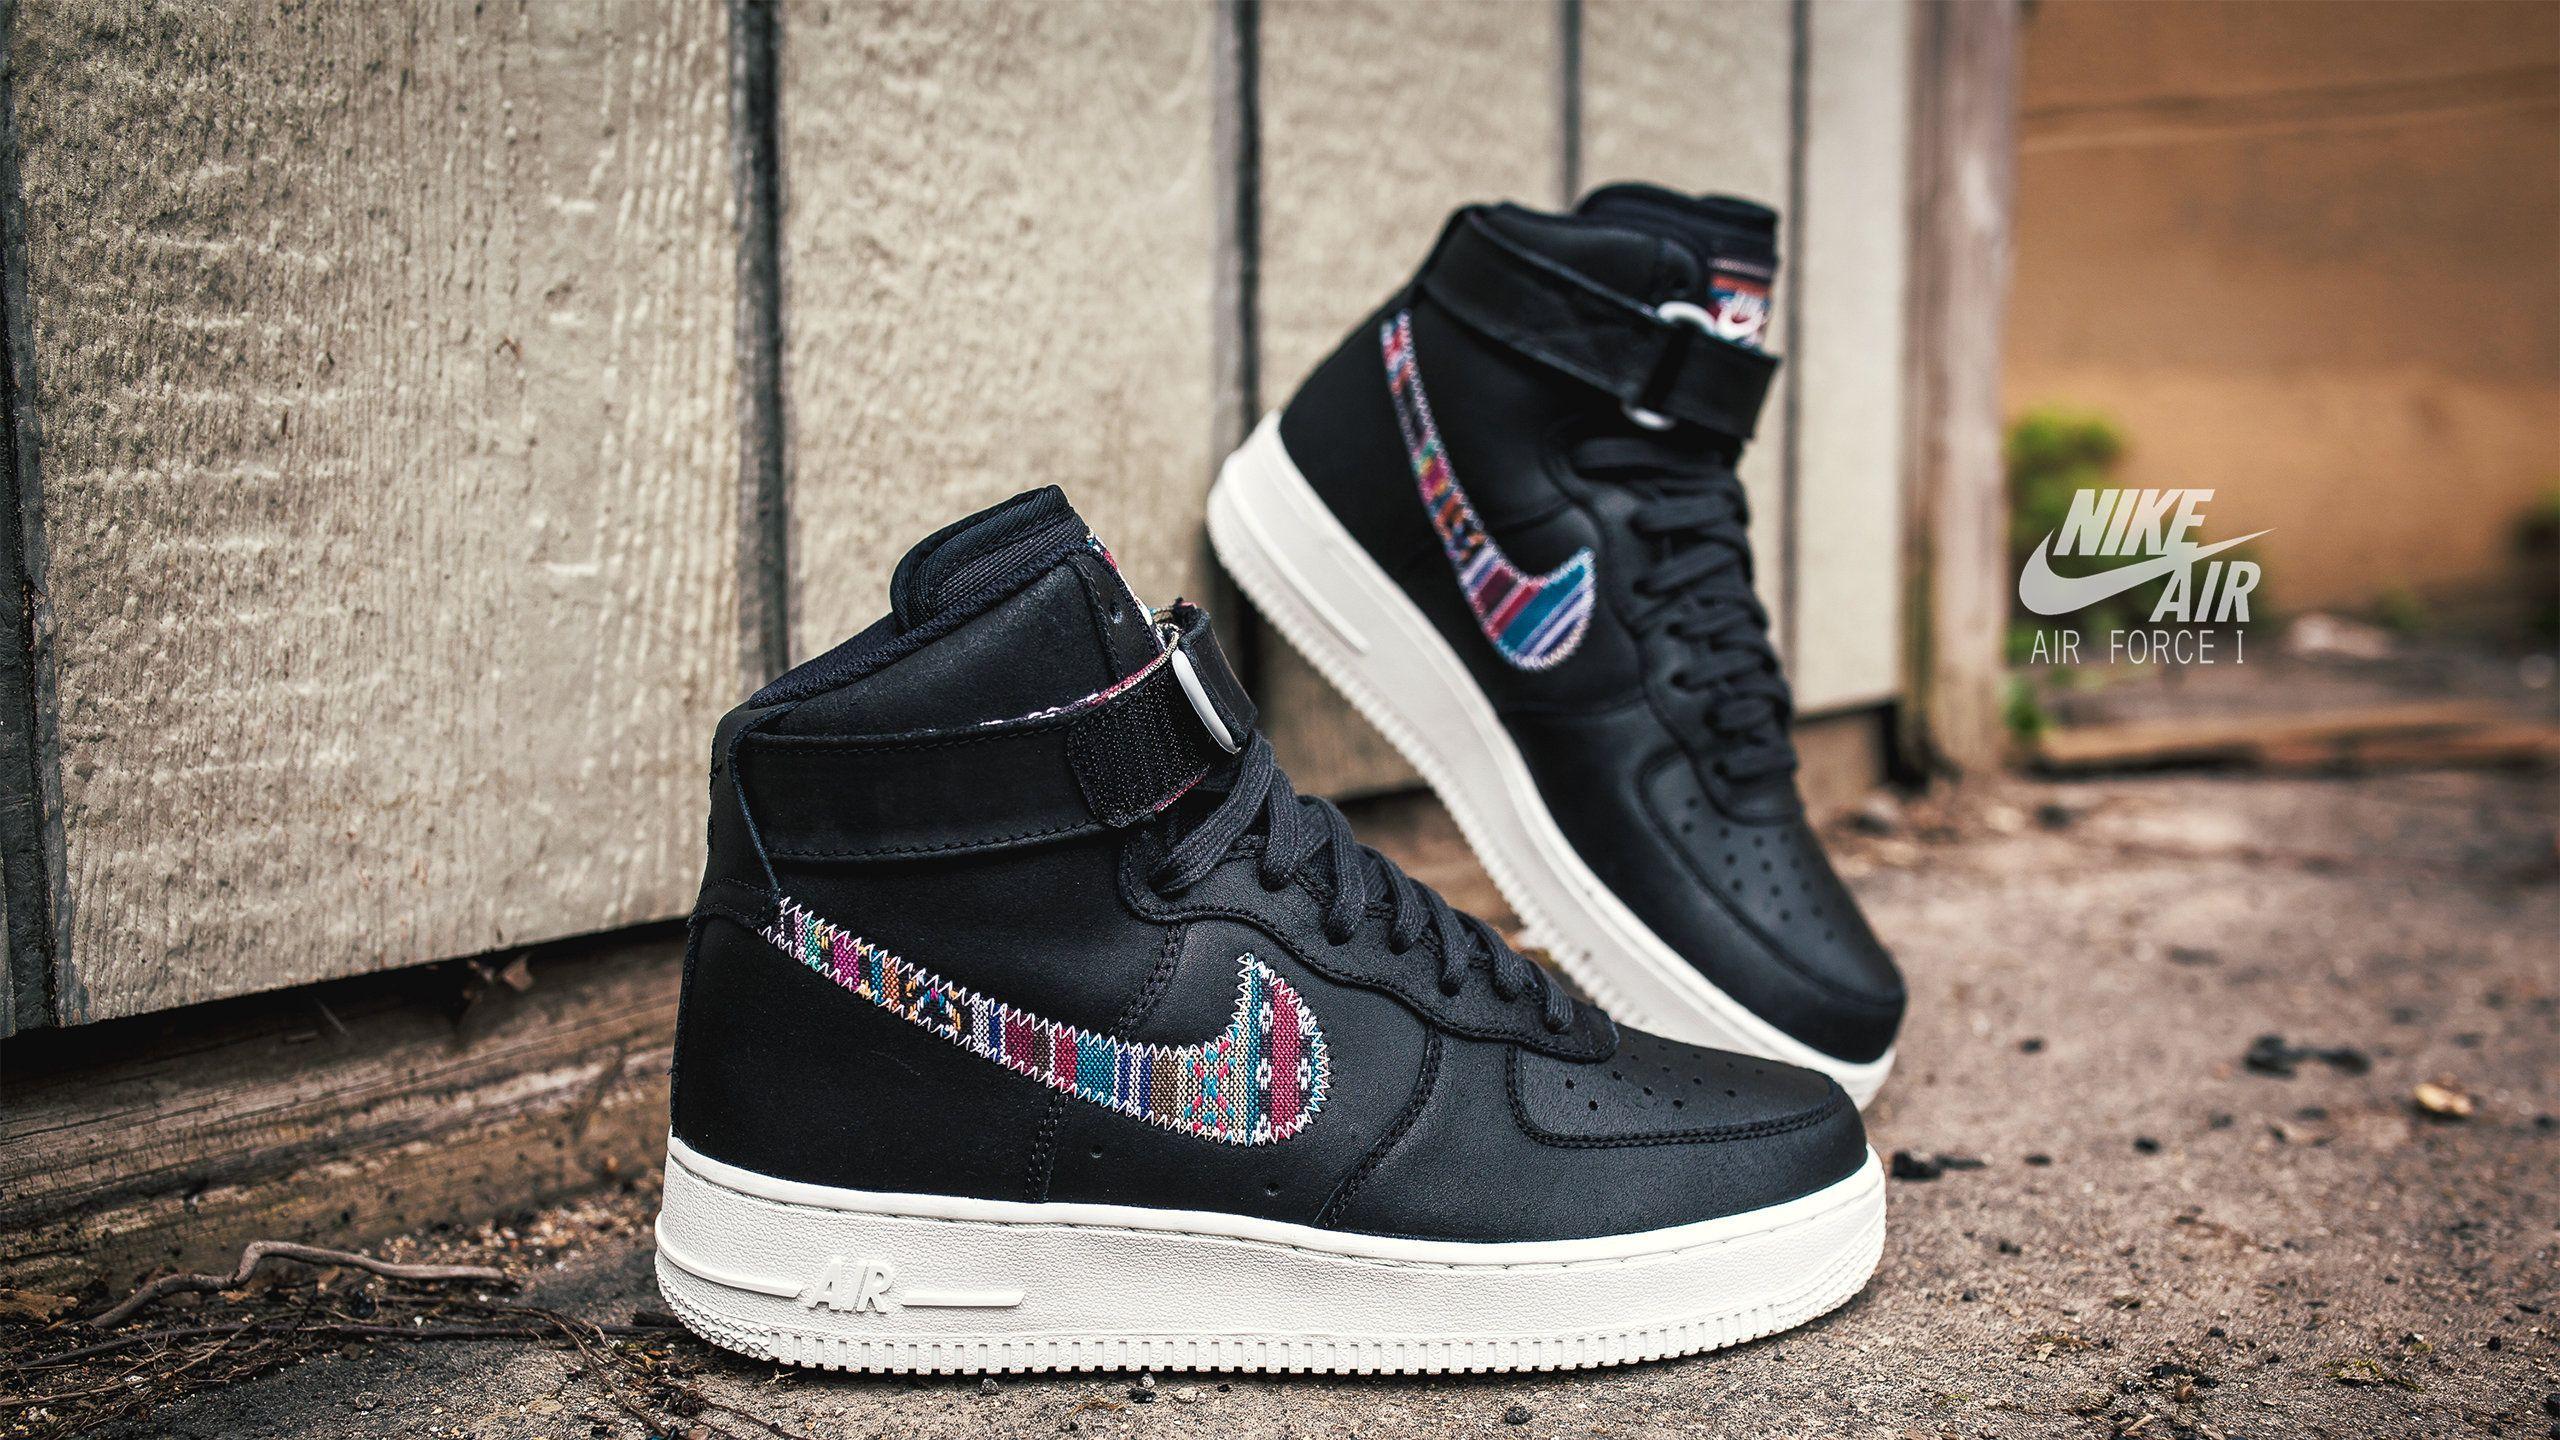 nike air force 1 wallpaper (61+ pictures) on black air force 1 wallpapers